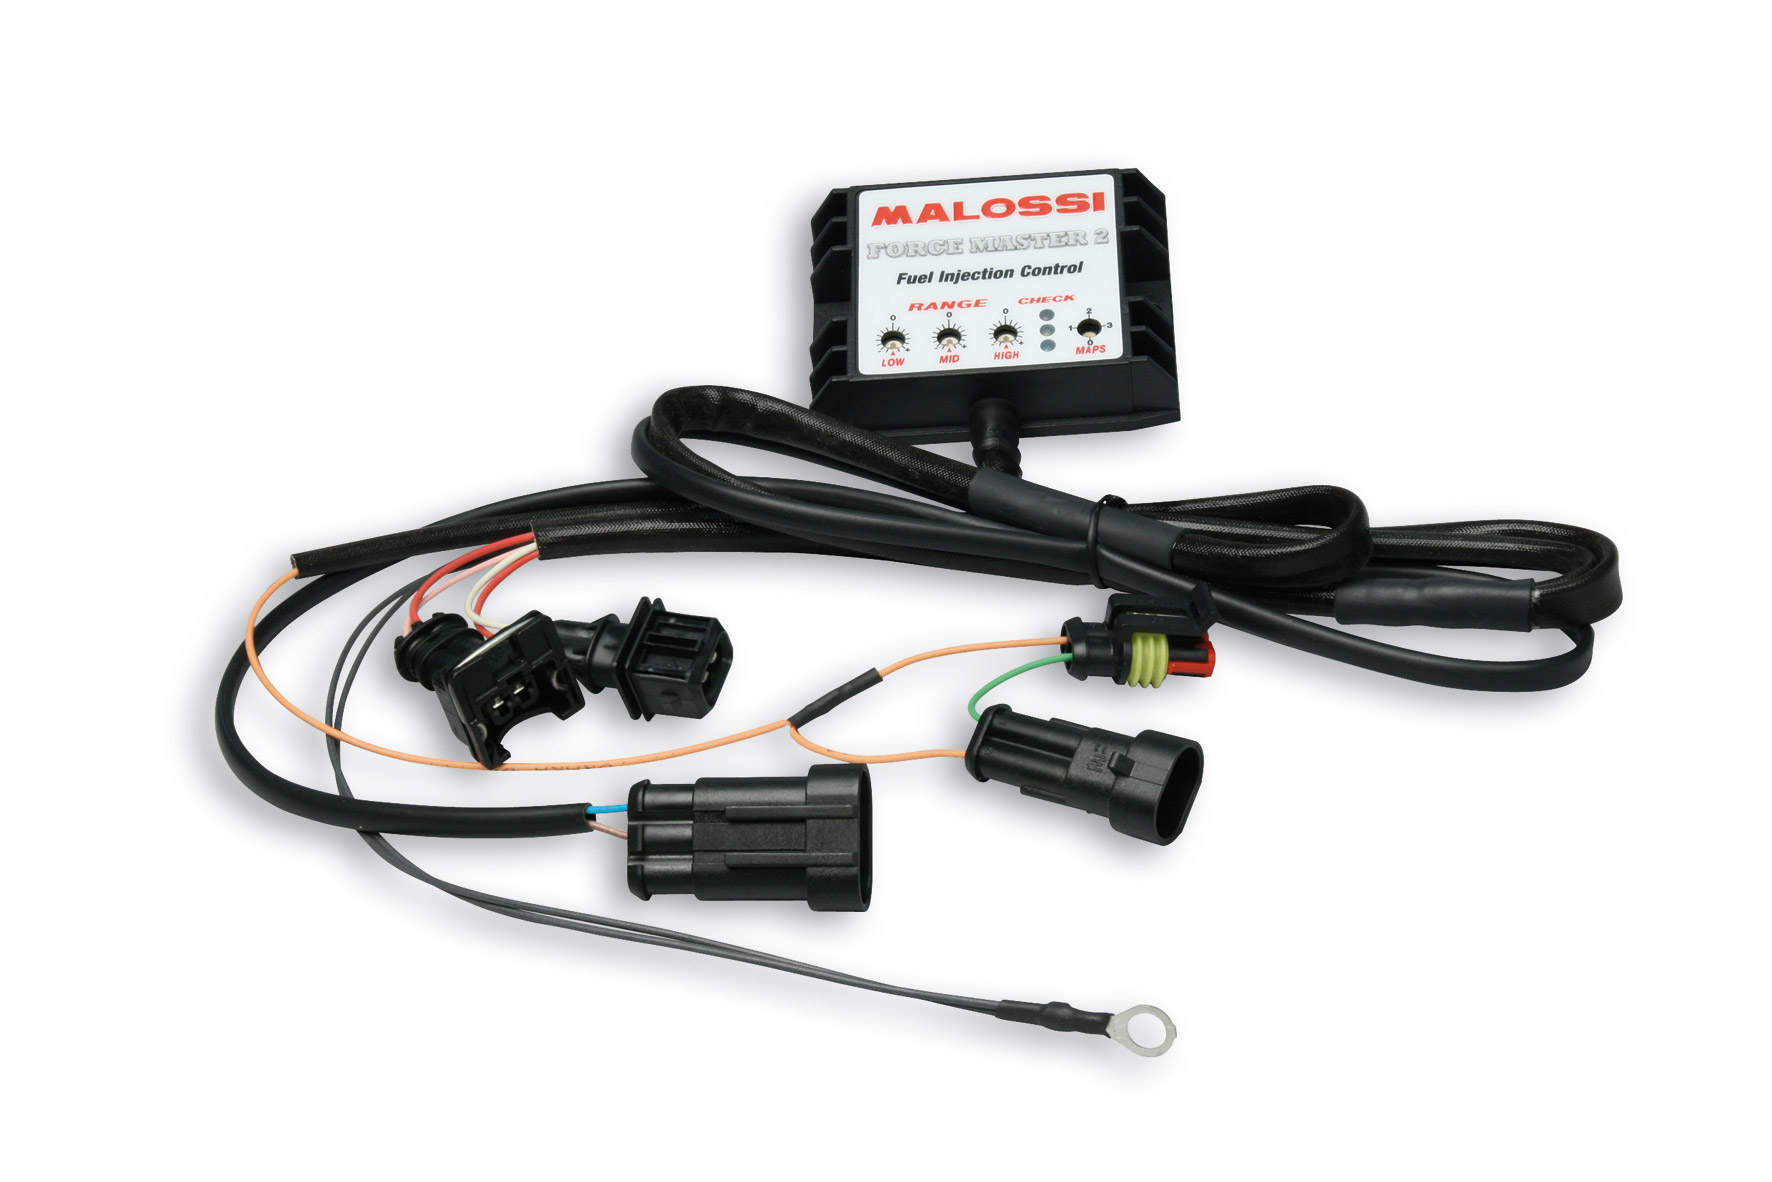 MALOSSI Electronic control unit for injection vehicles FORCE MASTER 2. - Picture 1 of 1